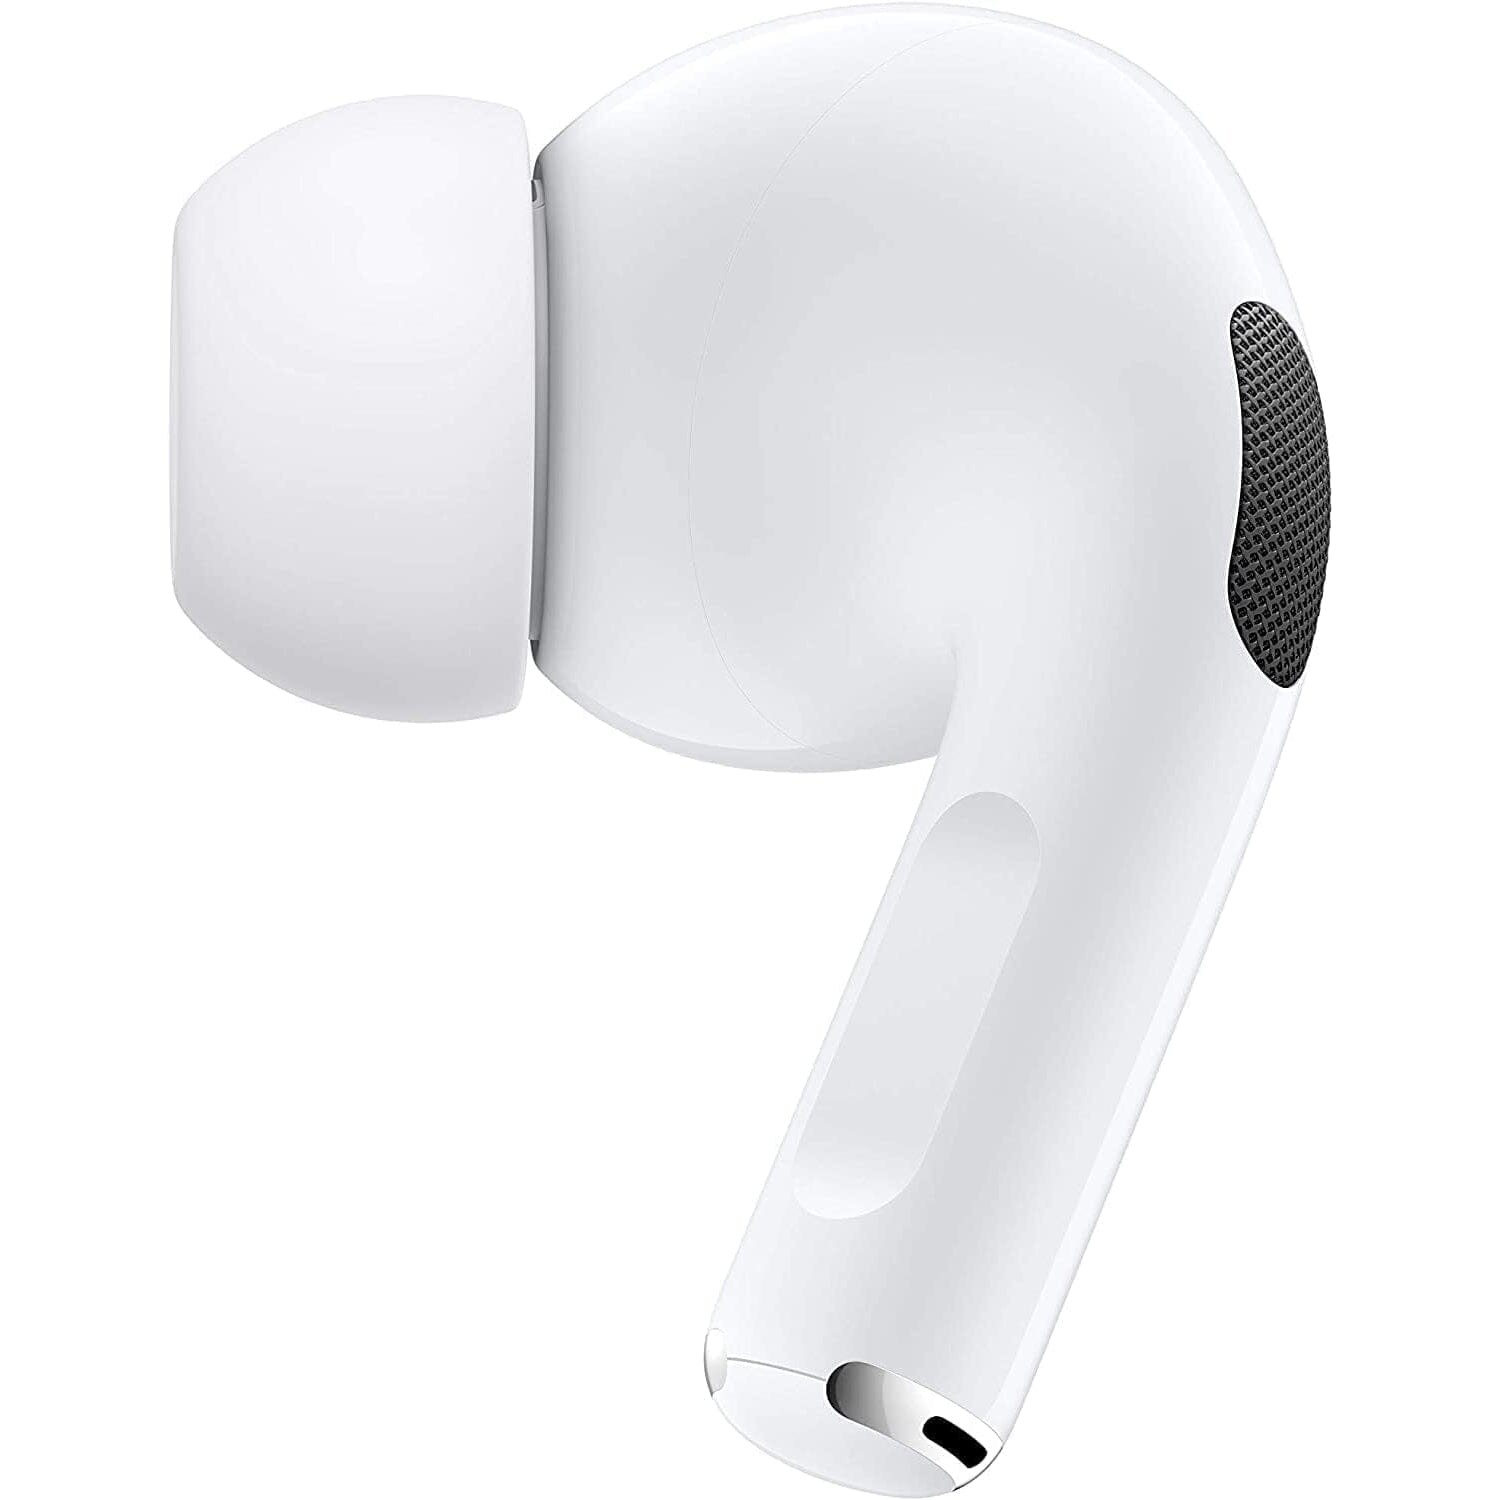 Apple AirPods Pro Wireless Earbuds with MagSafe Charging Case  (Refurbished)